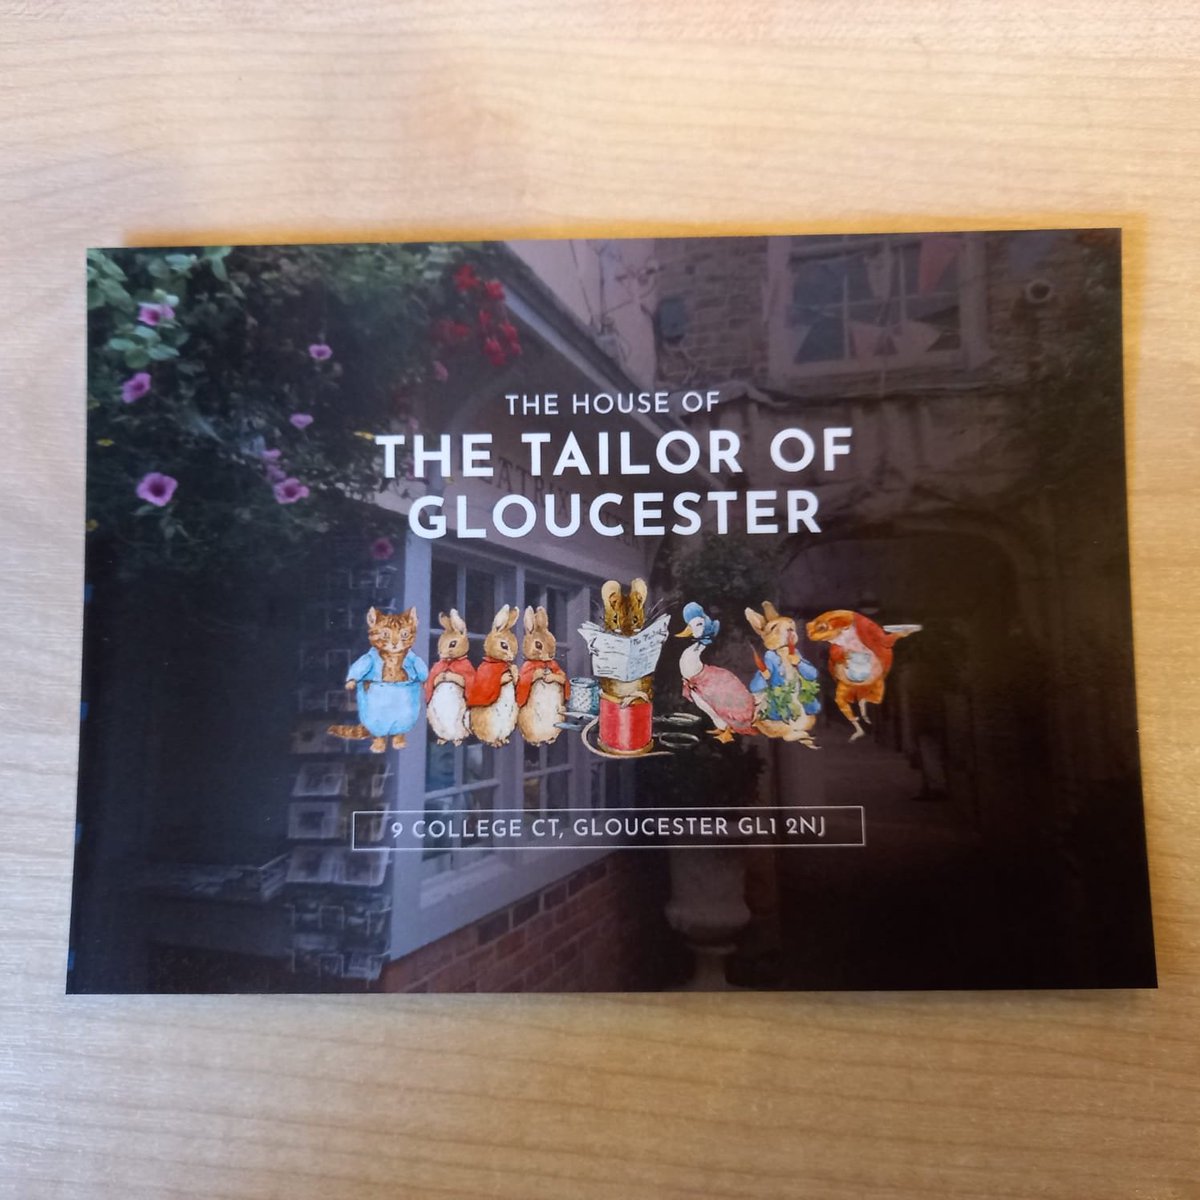 We've got some new design postcards for sale in the shop at 80p each.  We'll get these on the website soon.

#BeatrixPotter #VisitGloucester